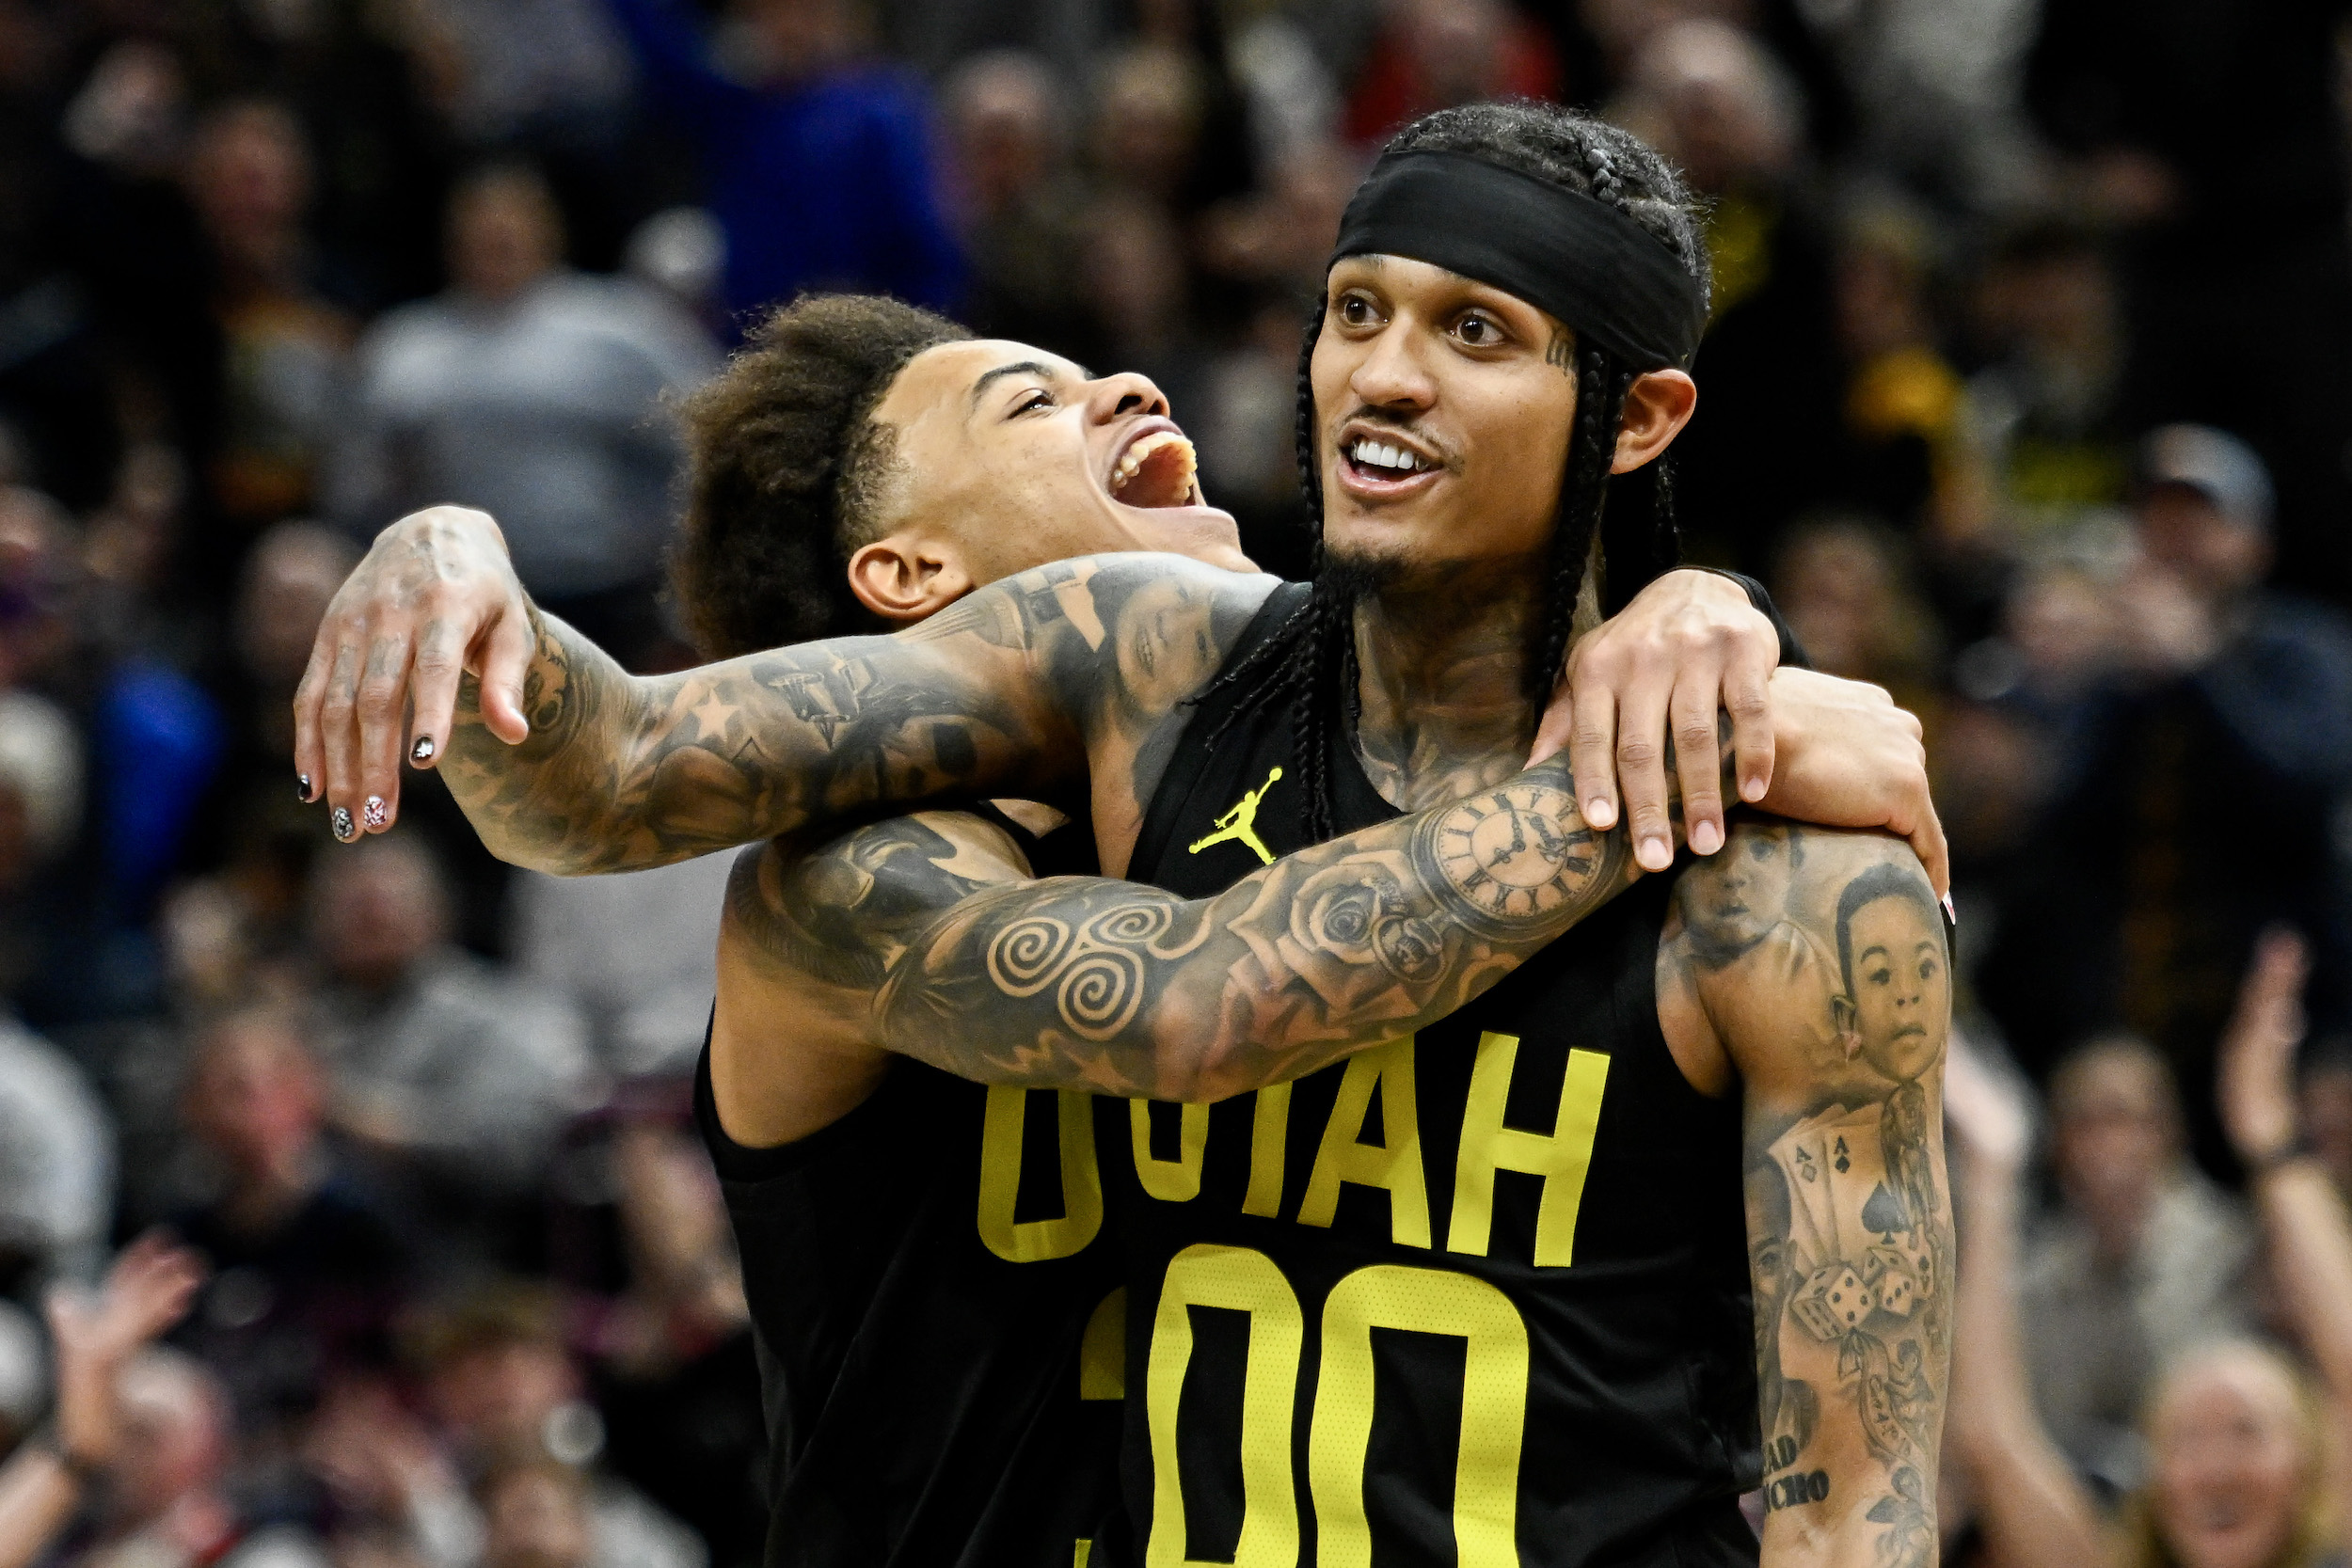 Jordan Clarkson is congratulated by a teammate for recording a triple-double.